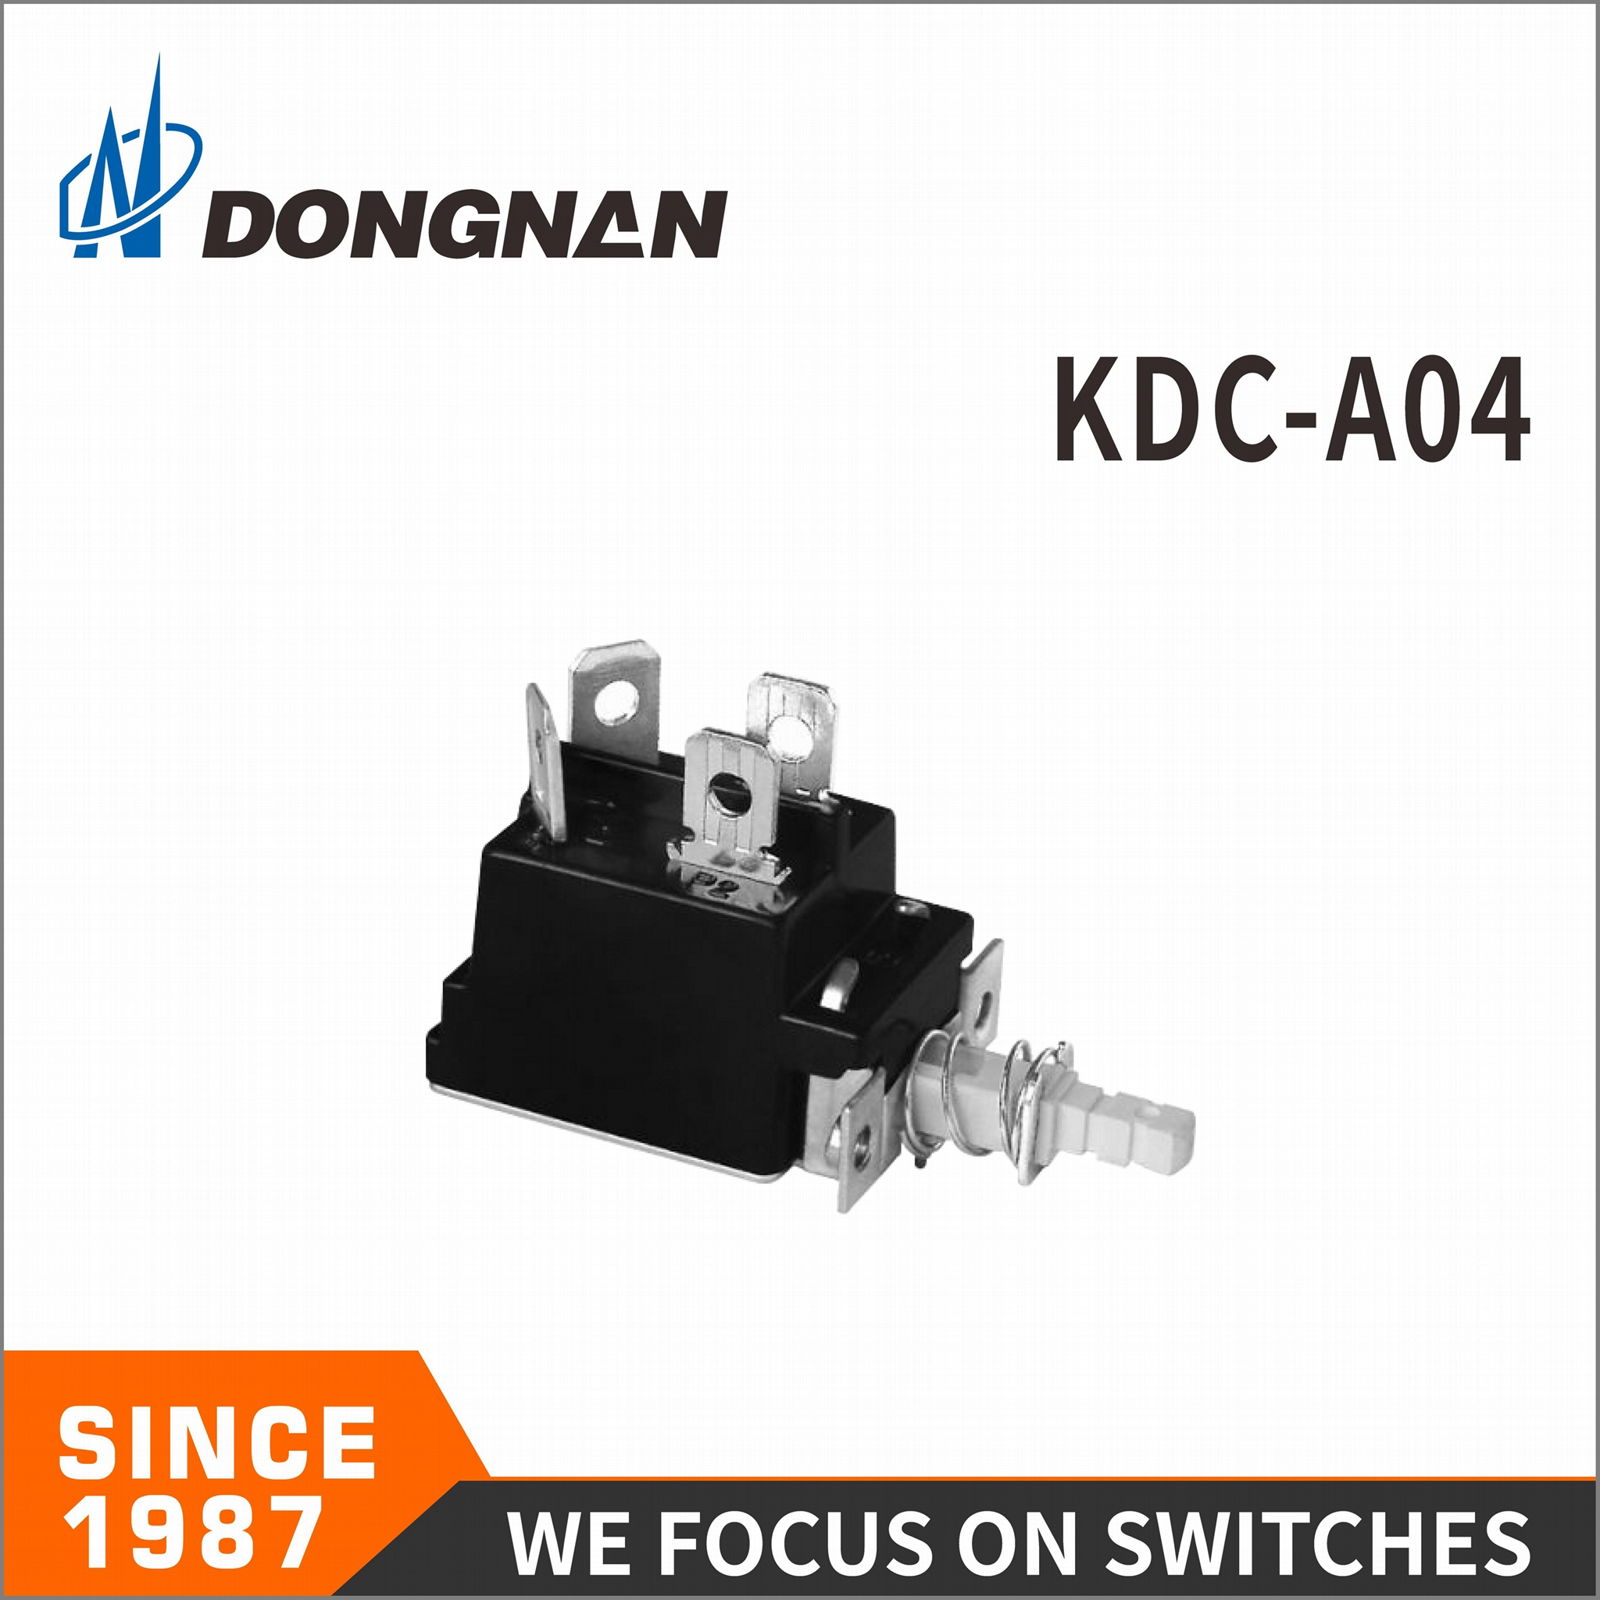 Dongnan Kdc-A04 Power Switch for Computer Long Life 4